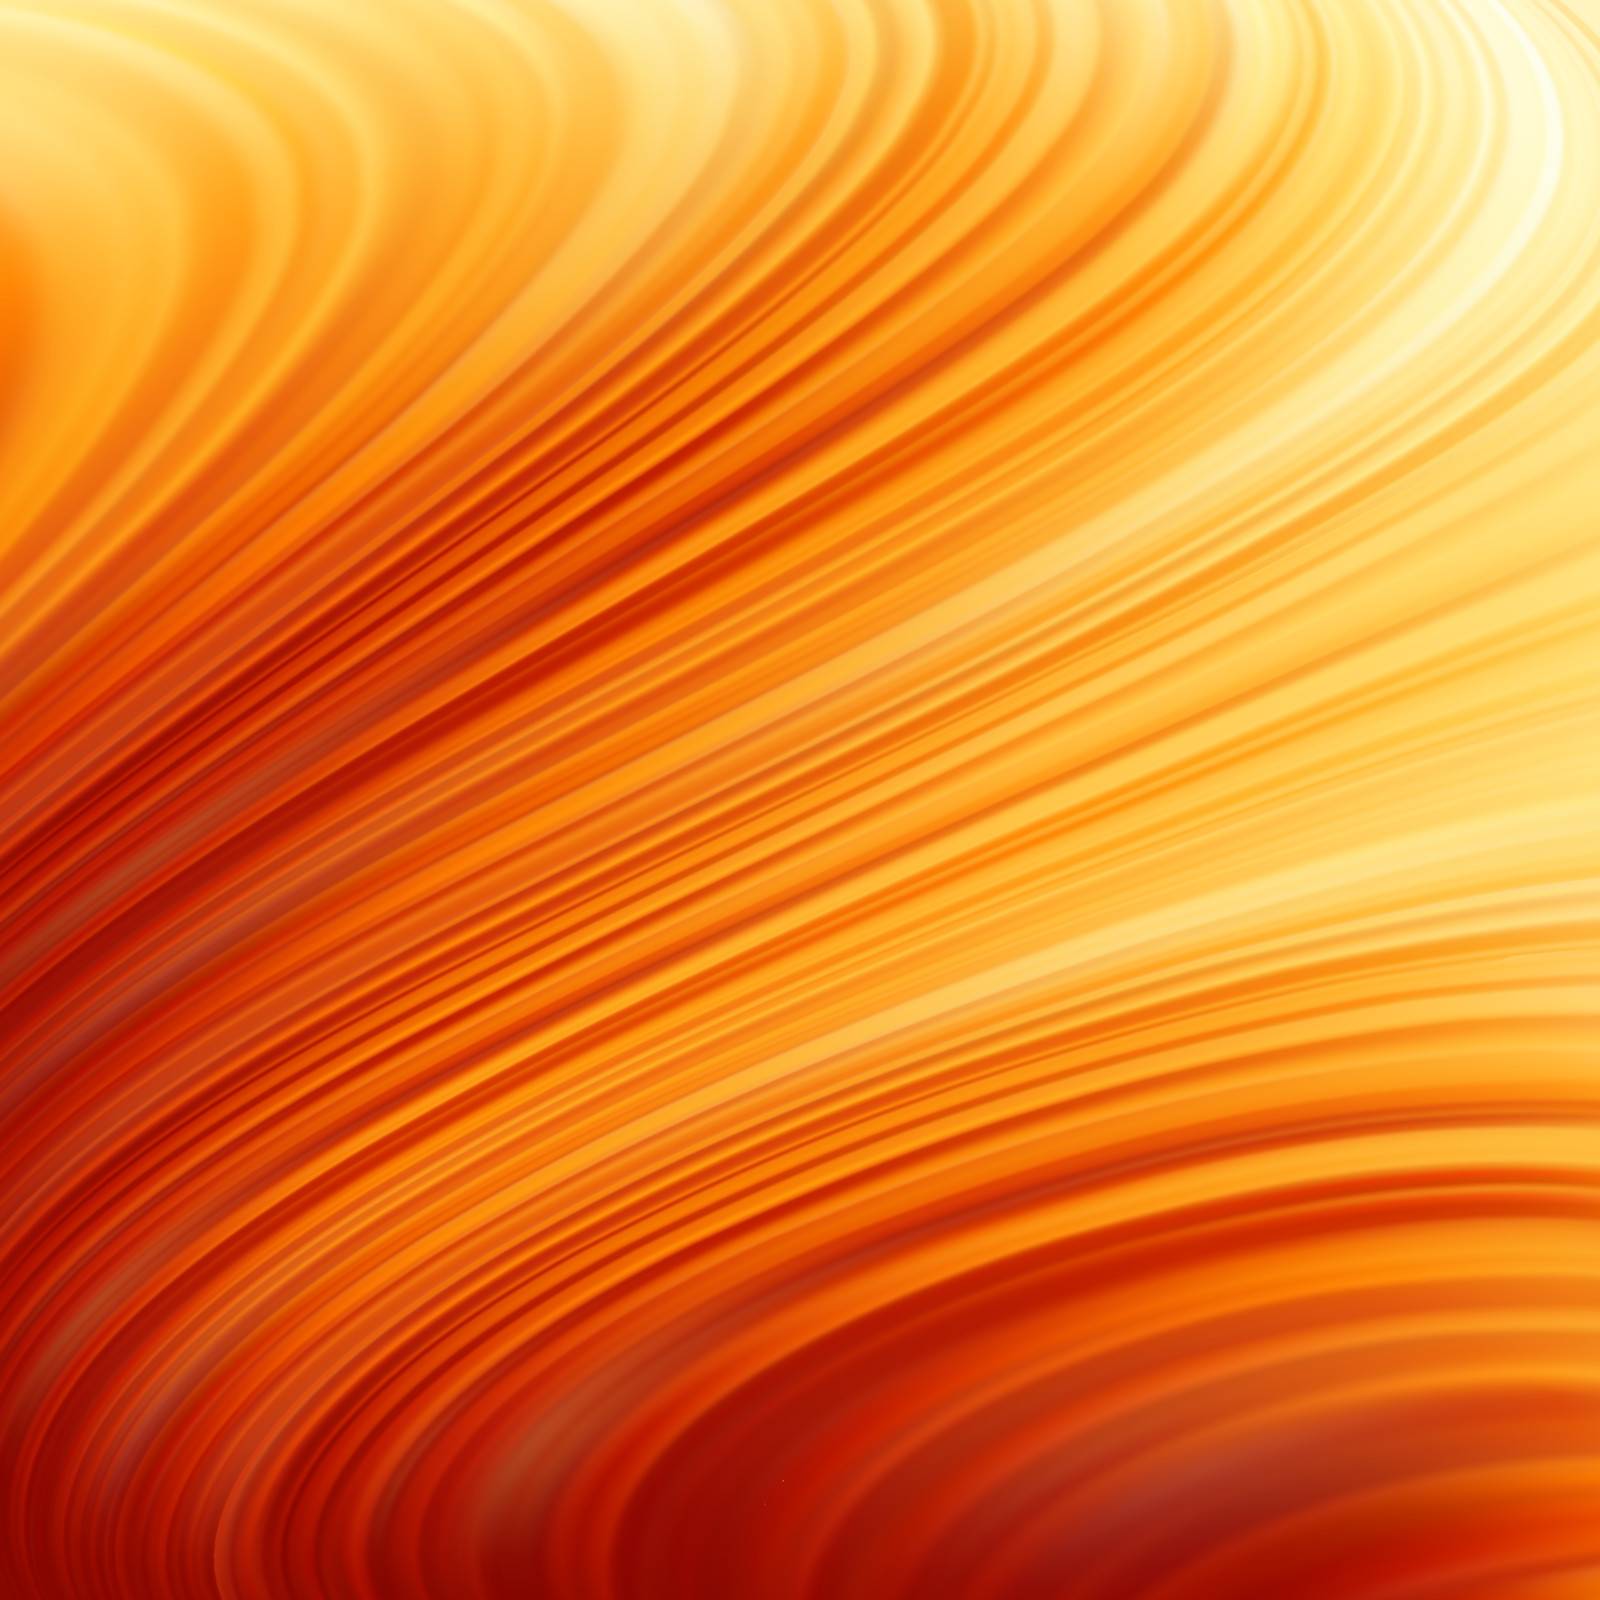 Abstract glow Twist background with fire flow. EPS 8 vector file included